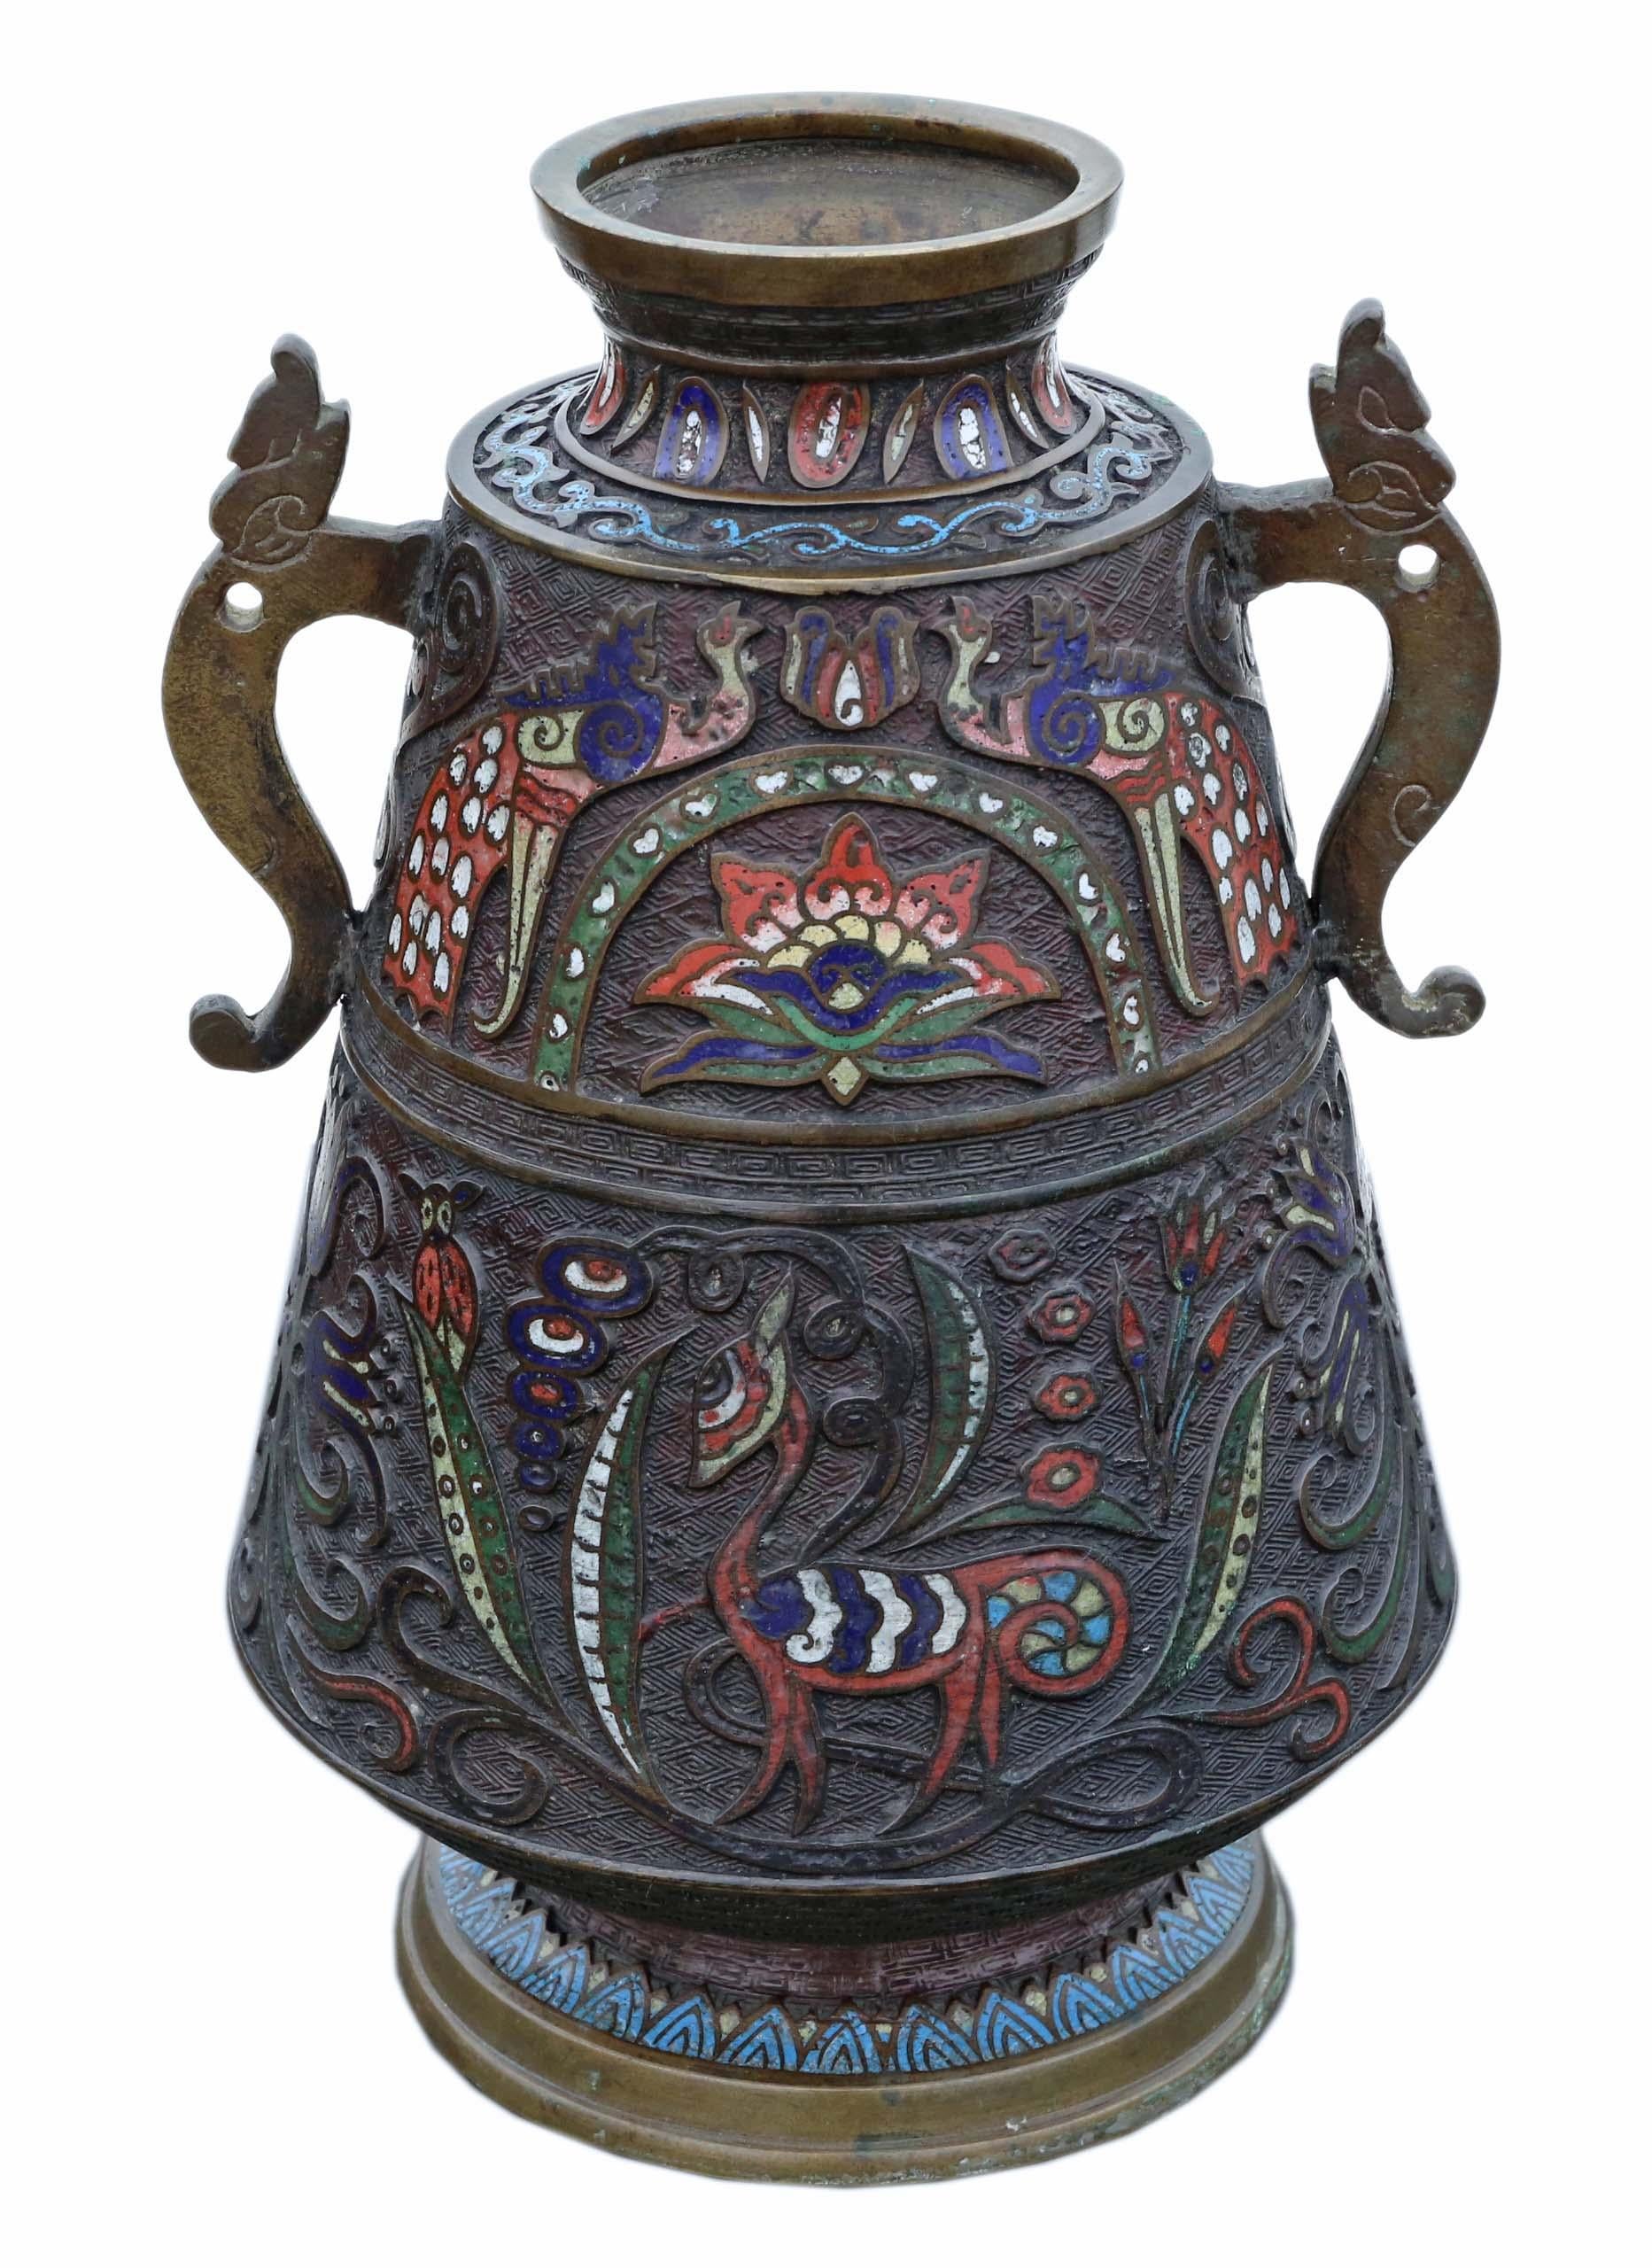 Antique Large Japanese Bronze Champleve Enamel Vase In Good Condition For Sale In Wisbech, Cambridgeshire